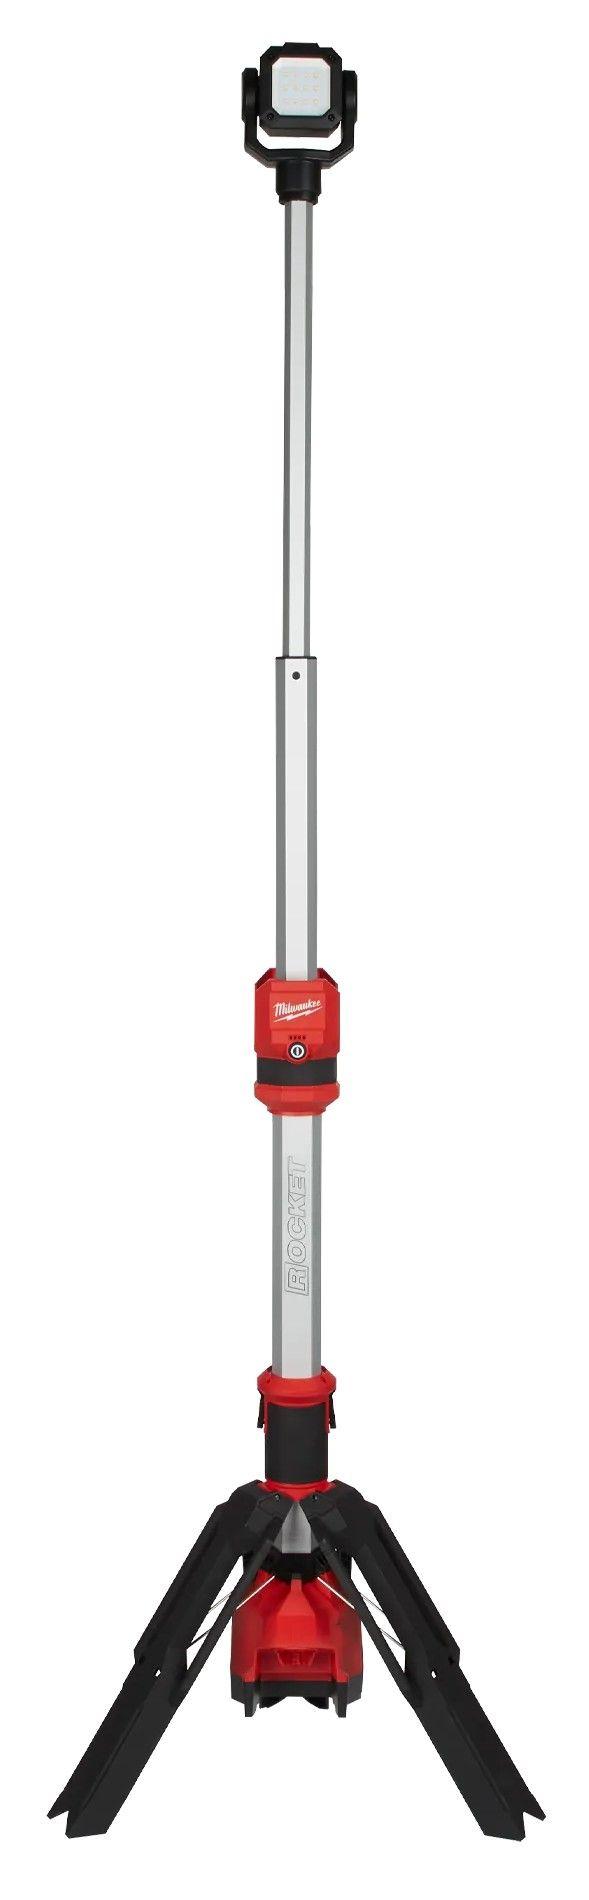 Milwaukee  2132-20 M12 Rocket Dual Power Tower Light - Red/Black - Excellent